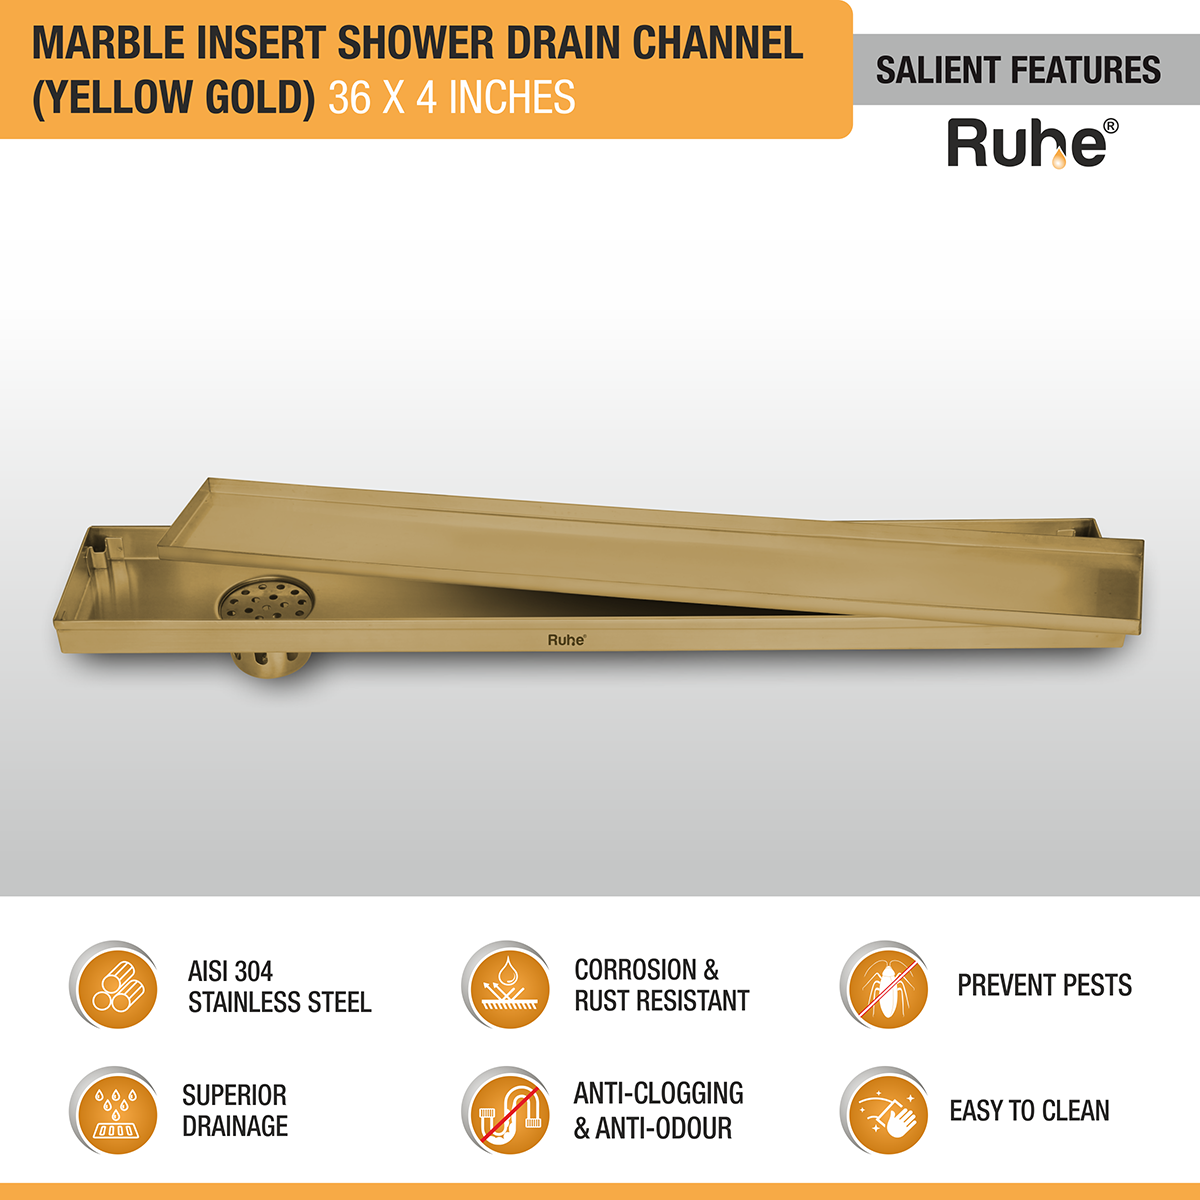 Marble Insert Shower Drain Channel (36 x 4 Inches) YELLOW GOLD PVD Coated features and benefits